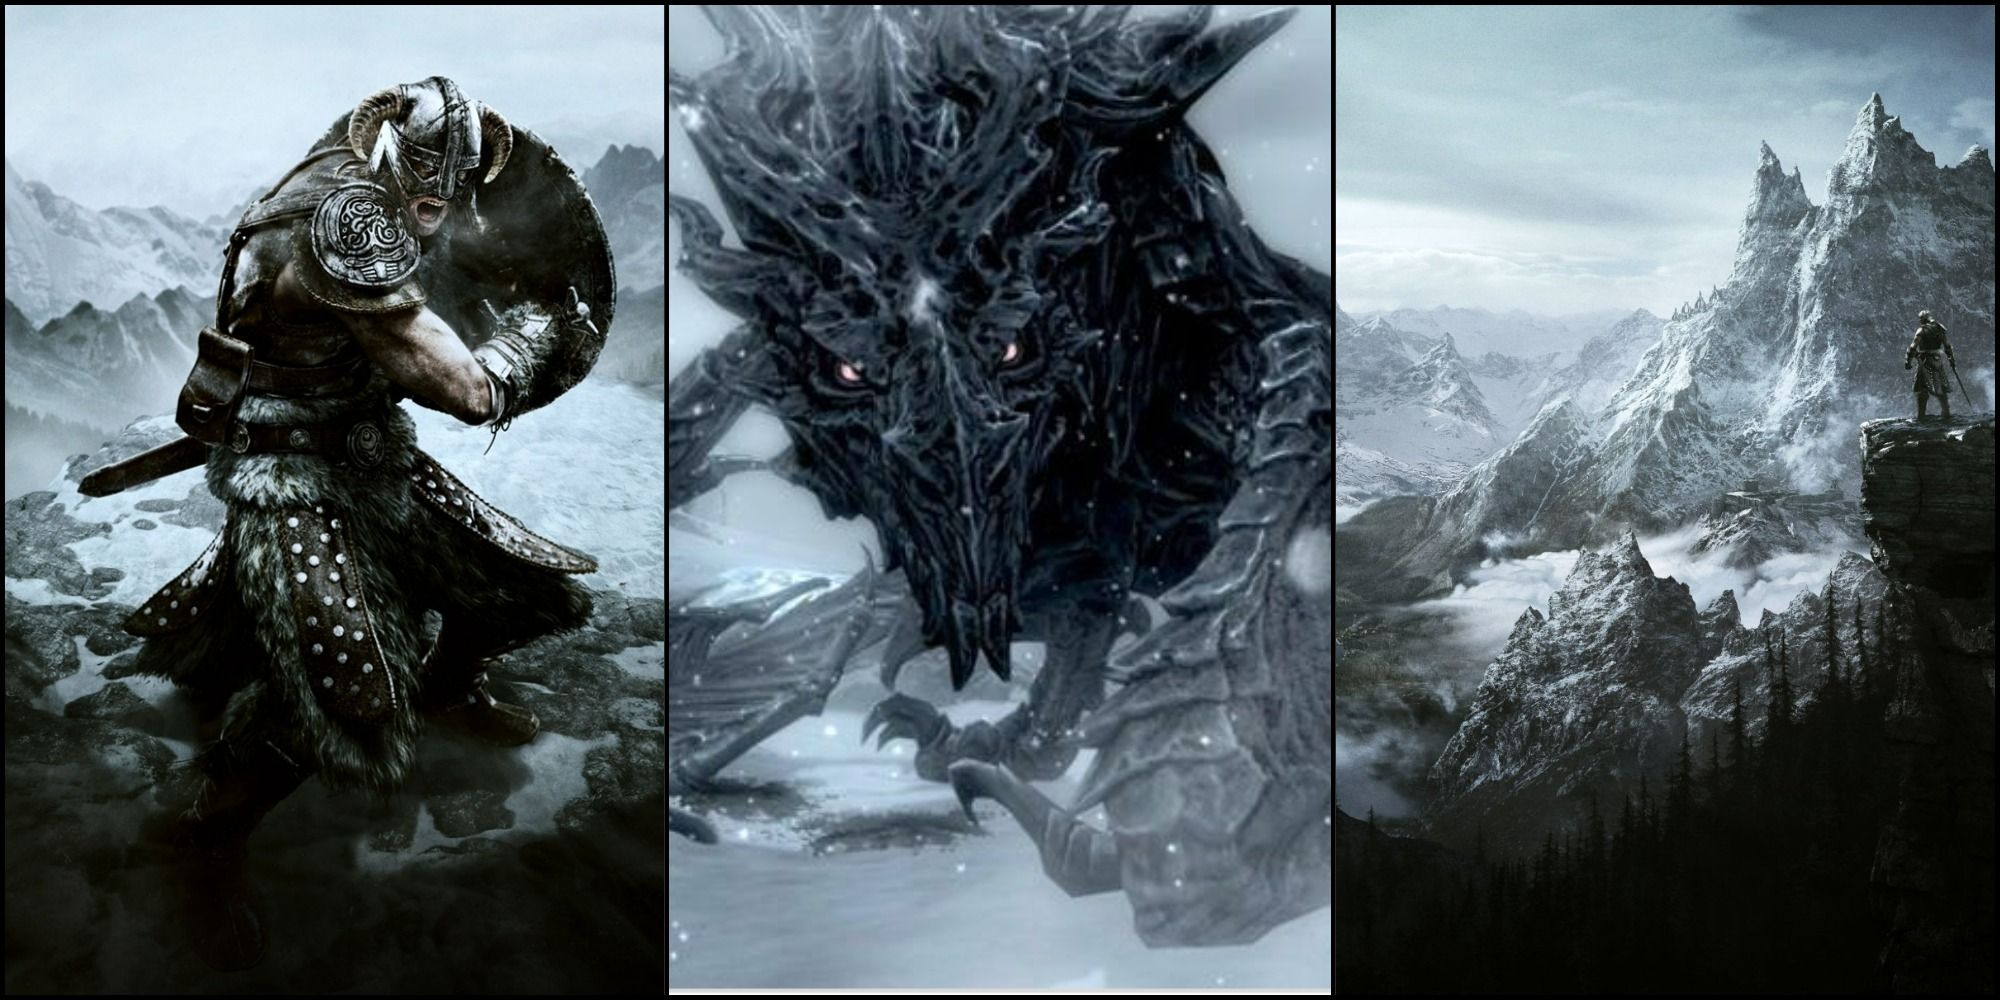 A split image for Skyrim featuring the Dragonborn to the left, Alduin in the middle and a view of the mountainous province to the right